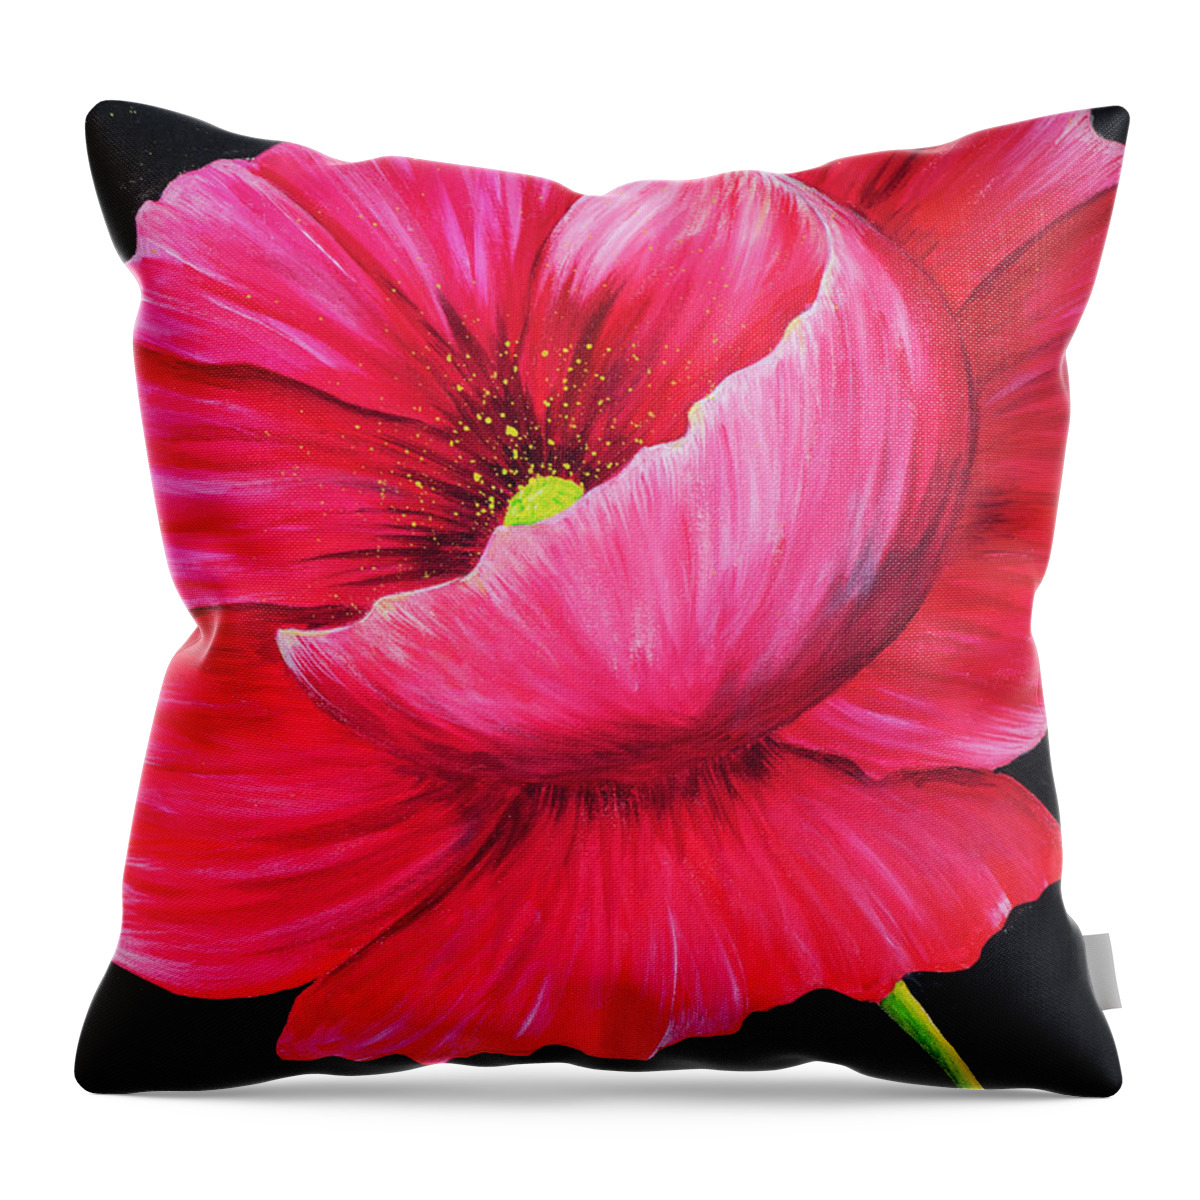 Flower Throw Pillow featuring the painting Envy by Iryna Goodall